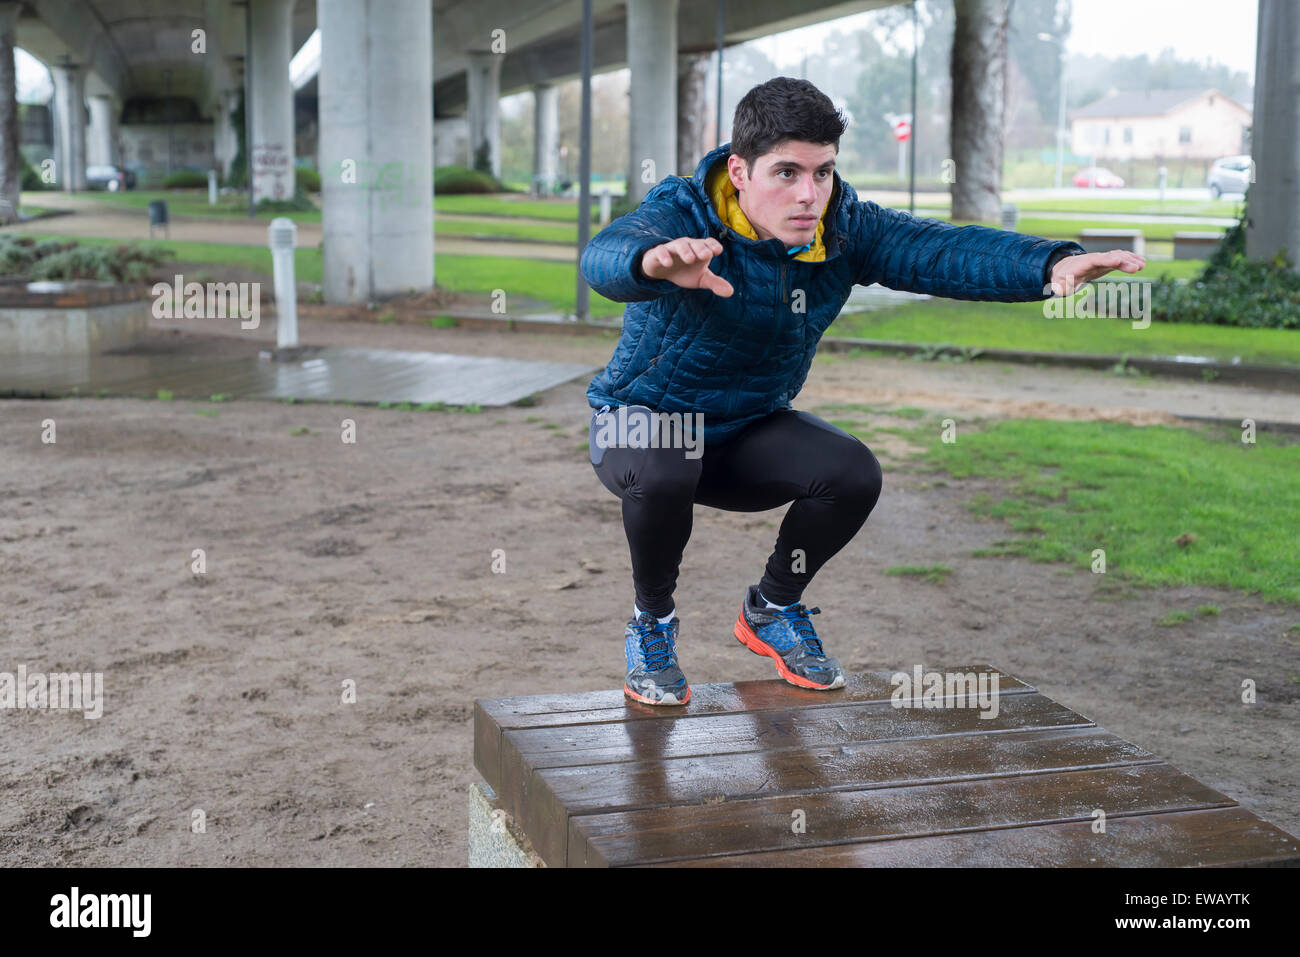 Man squatting in a park on a rainy day Stock Photo